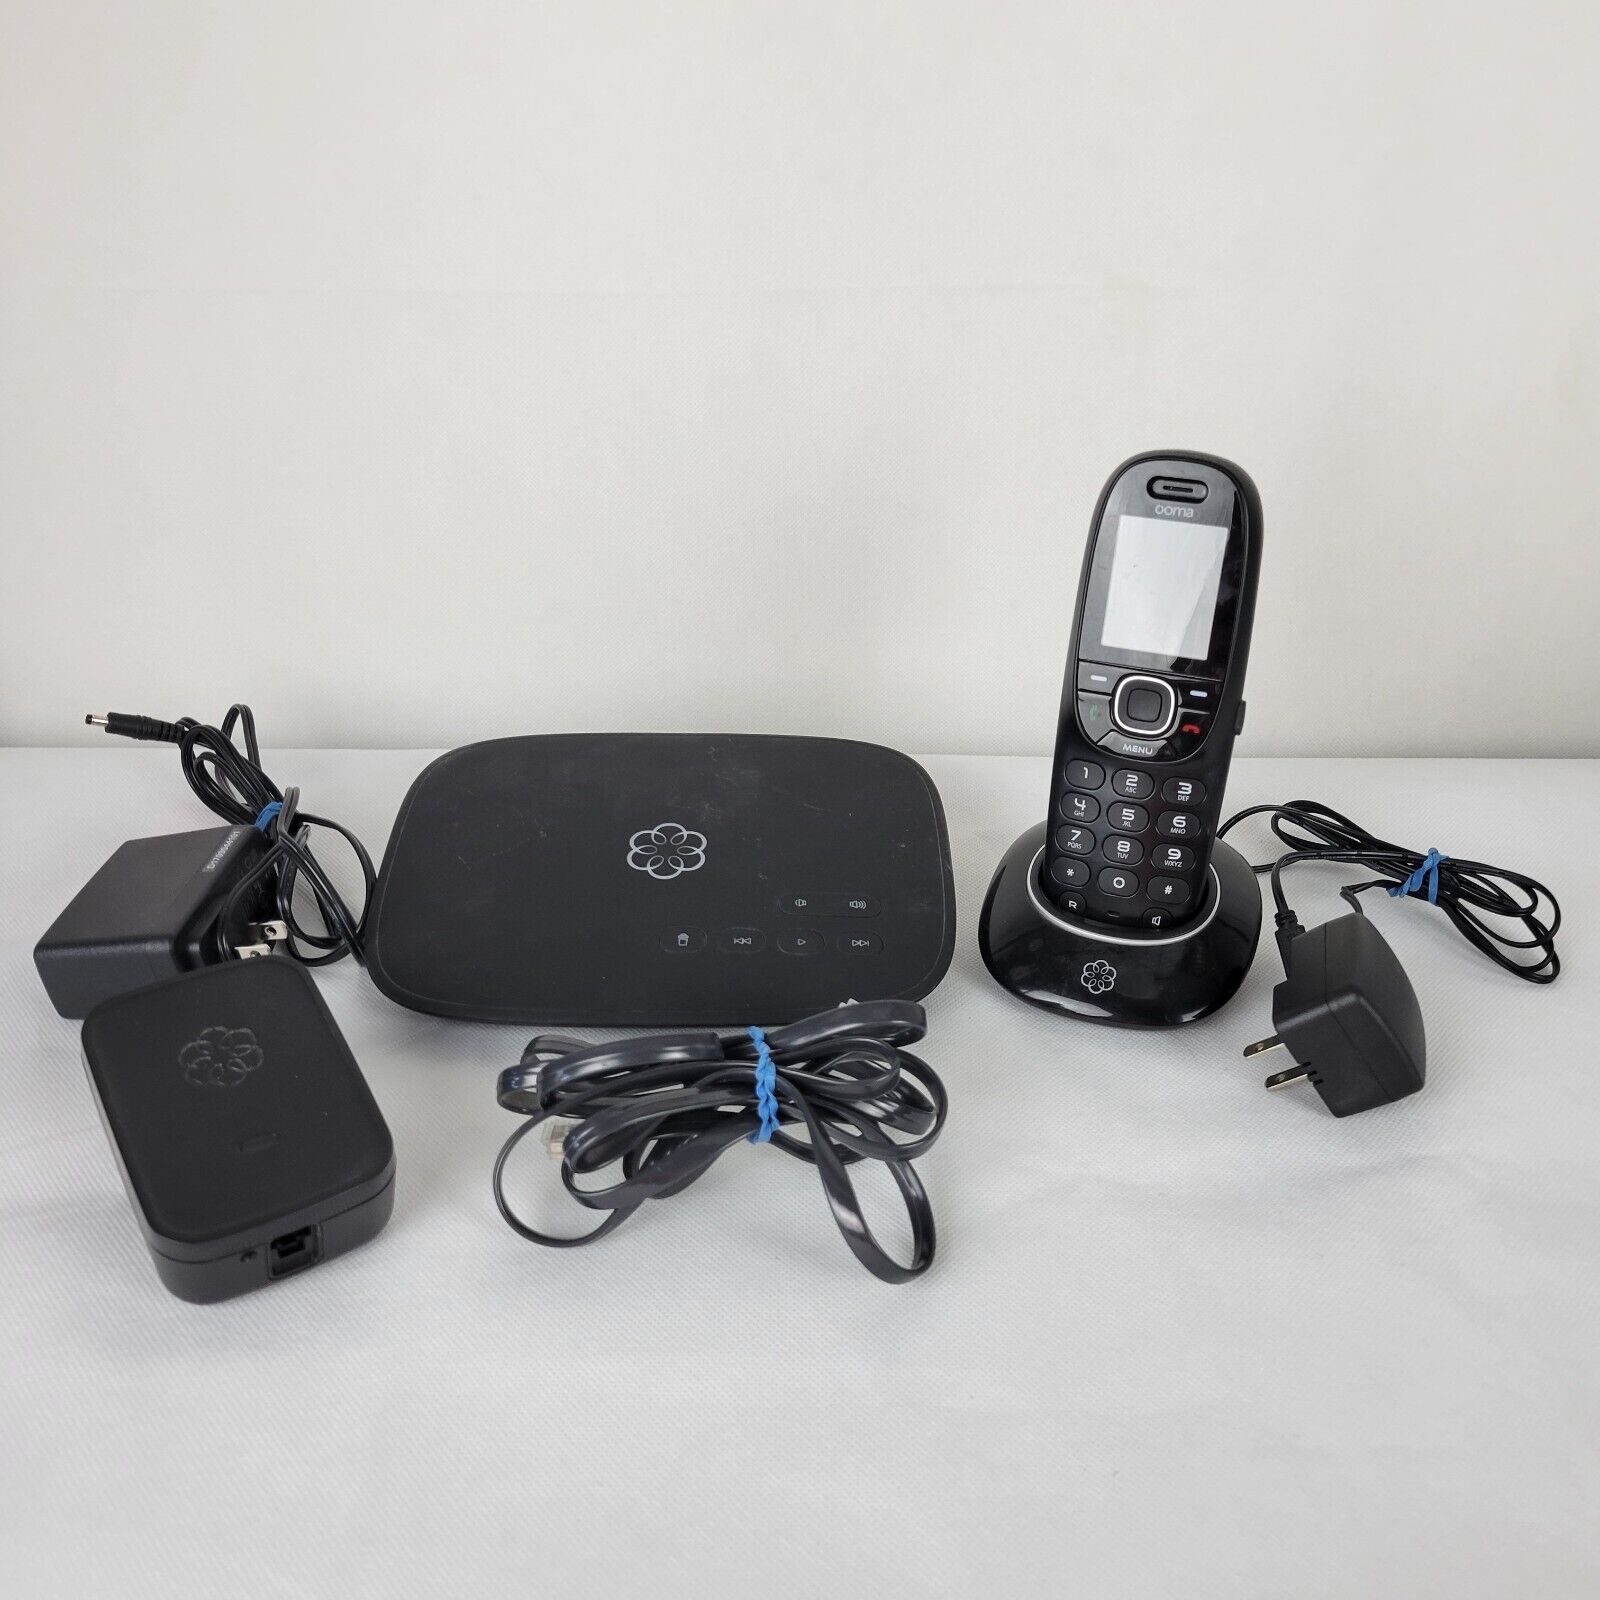 Ooma Telo VoIP Home Phone System Base, Cordless Handset w Charger, Linx